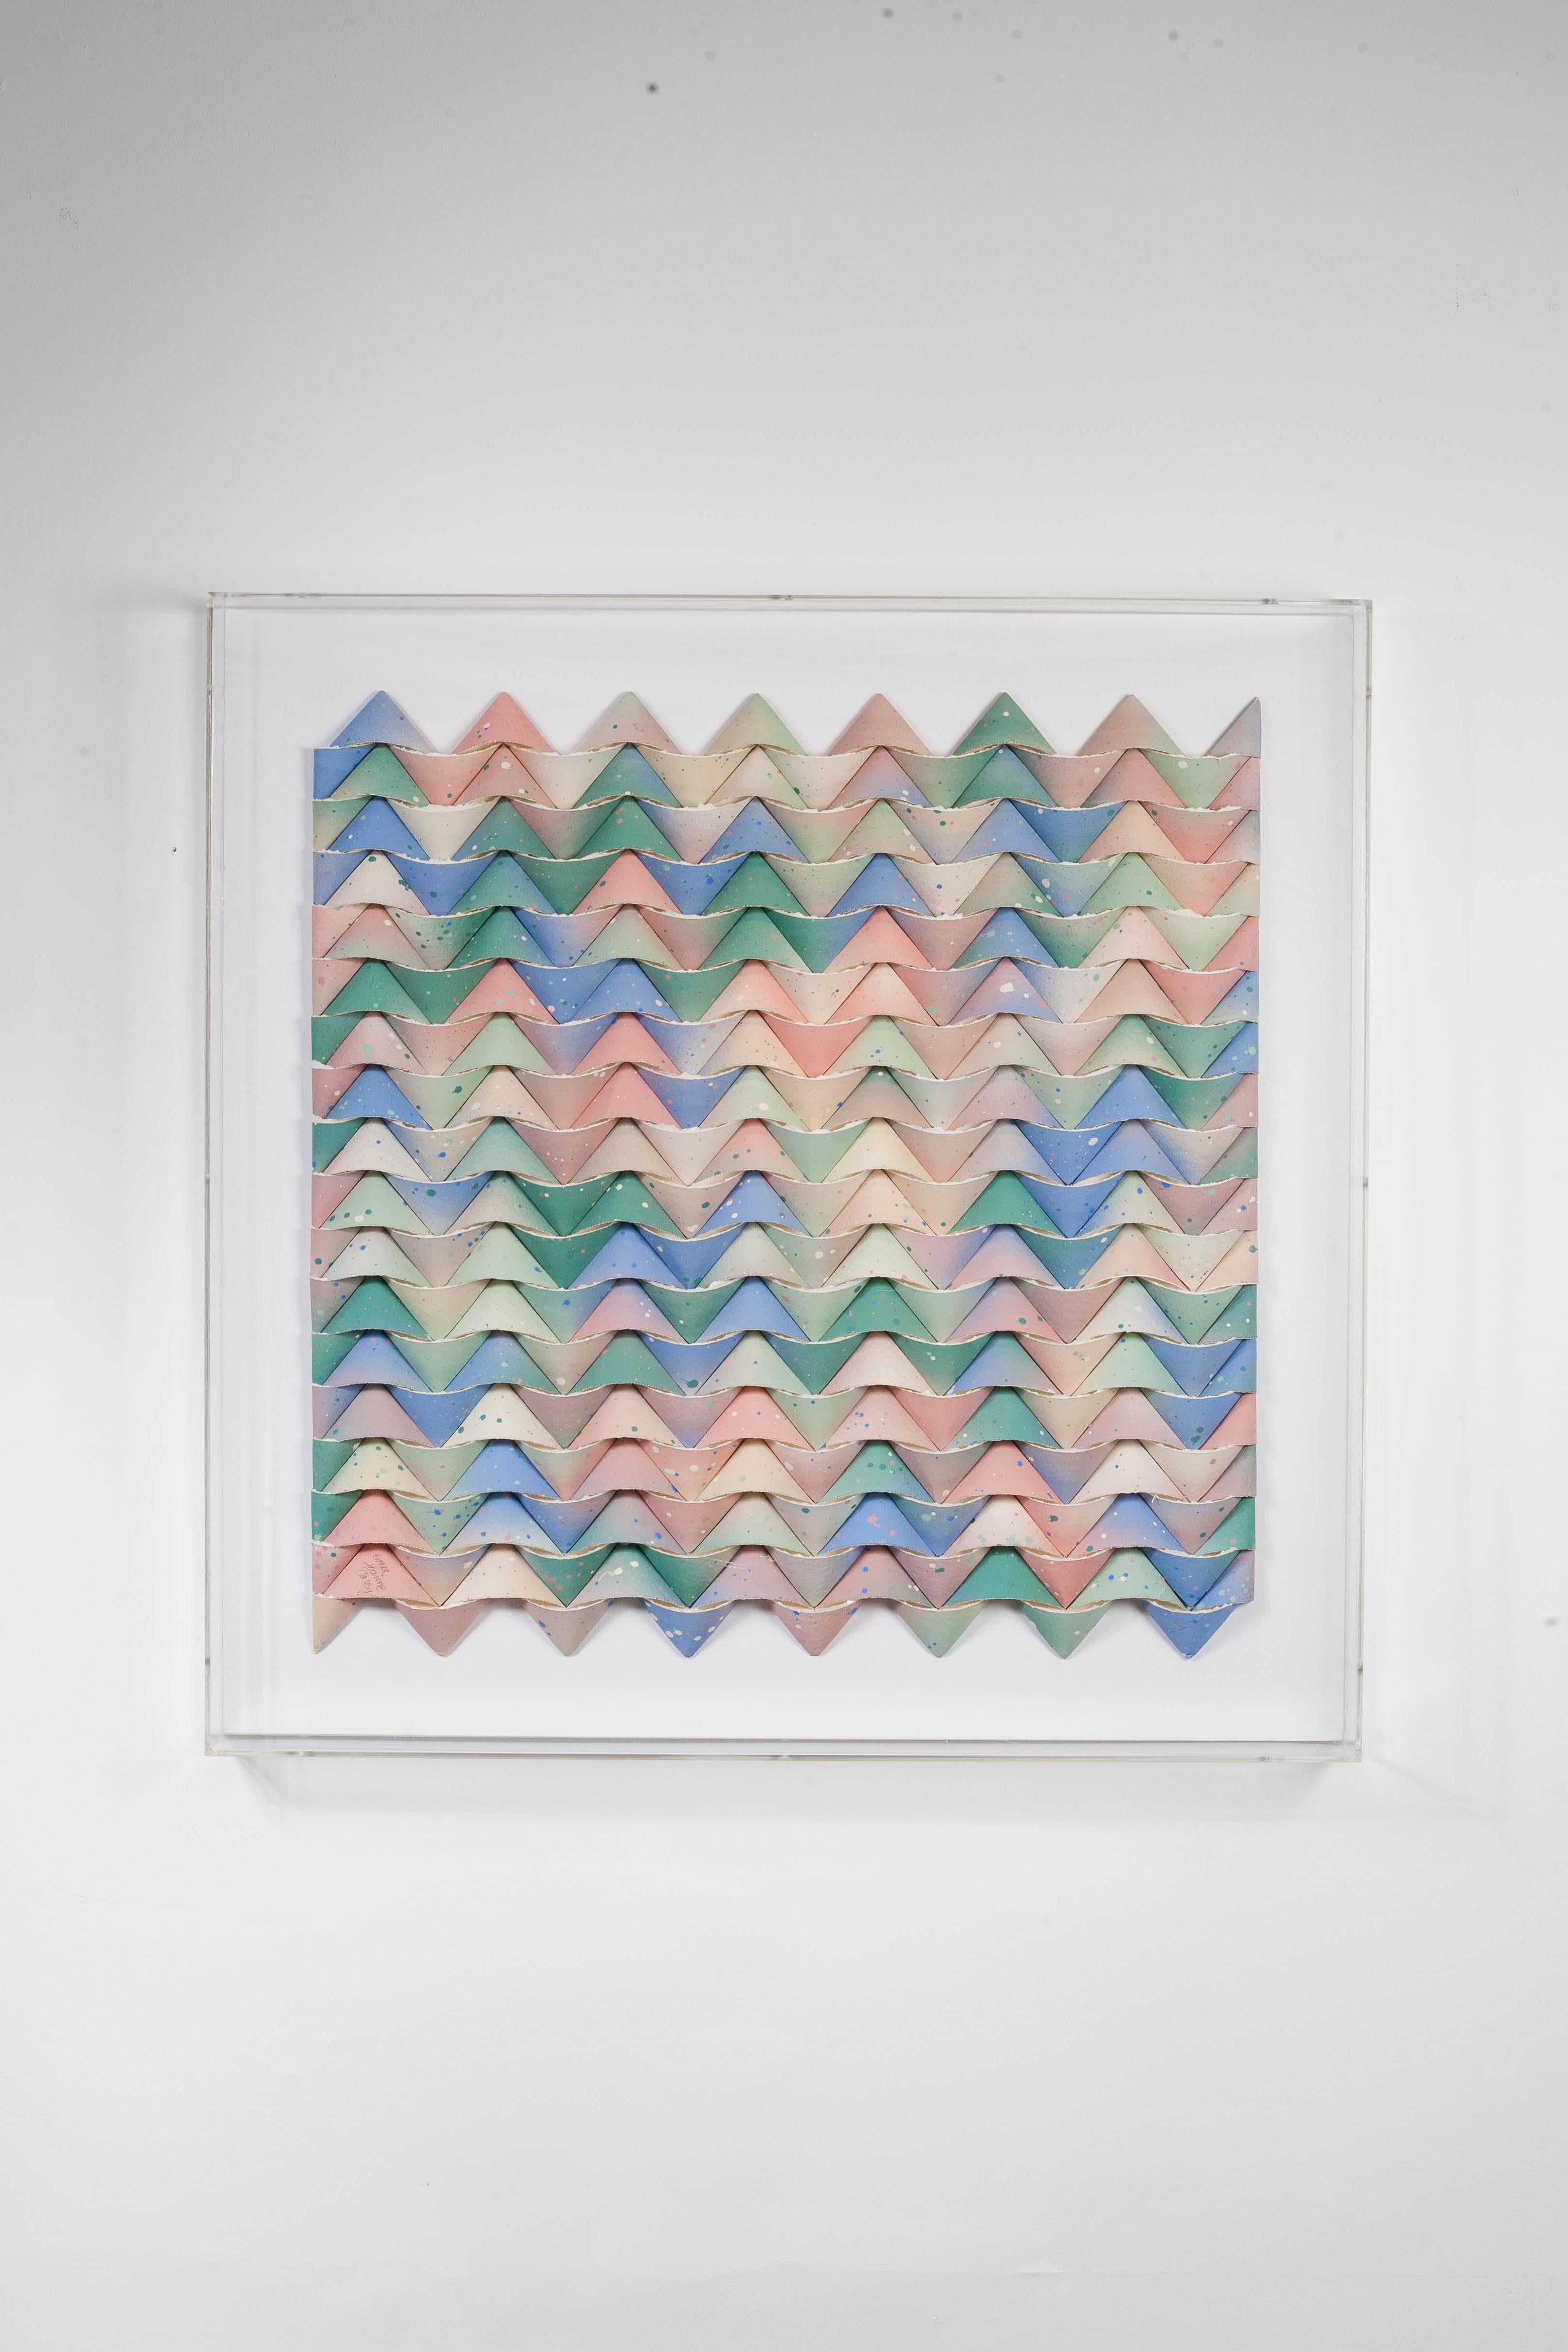 Amazing kinetic atwork by Joanne Casey, USA 1988
Painting on canvas in a plexiglass box.
Very decorative, the pastel colors are beautiful. 